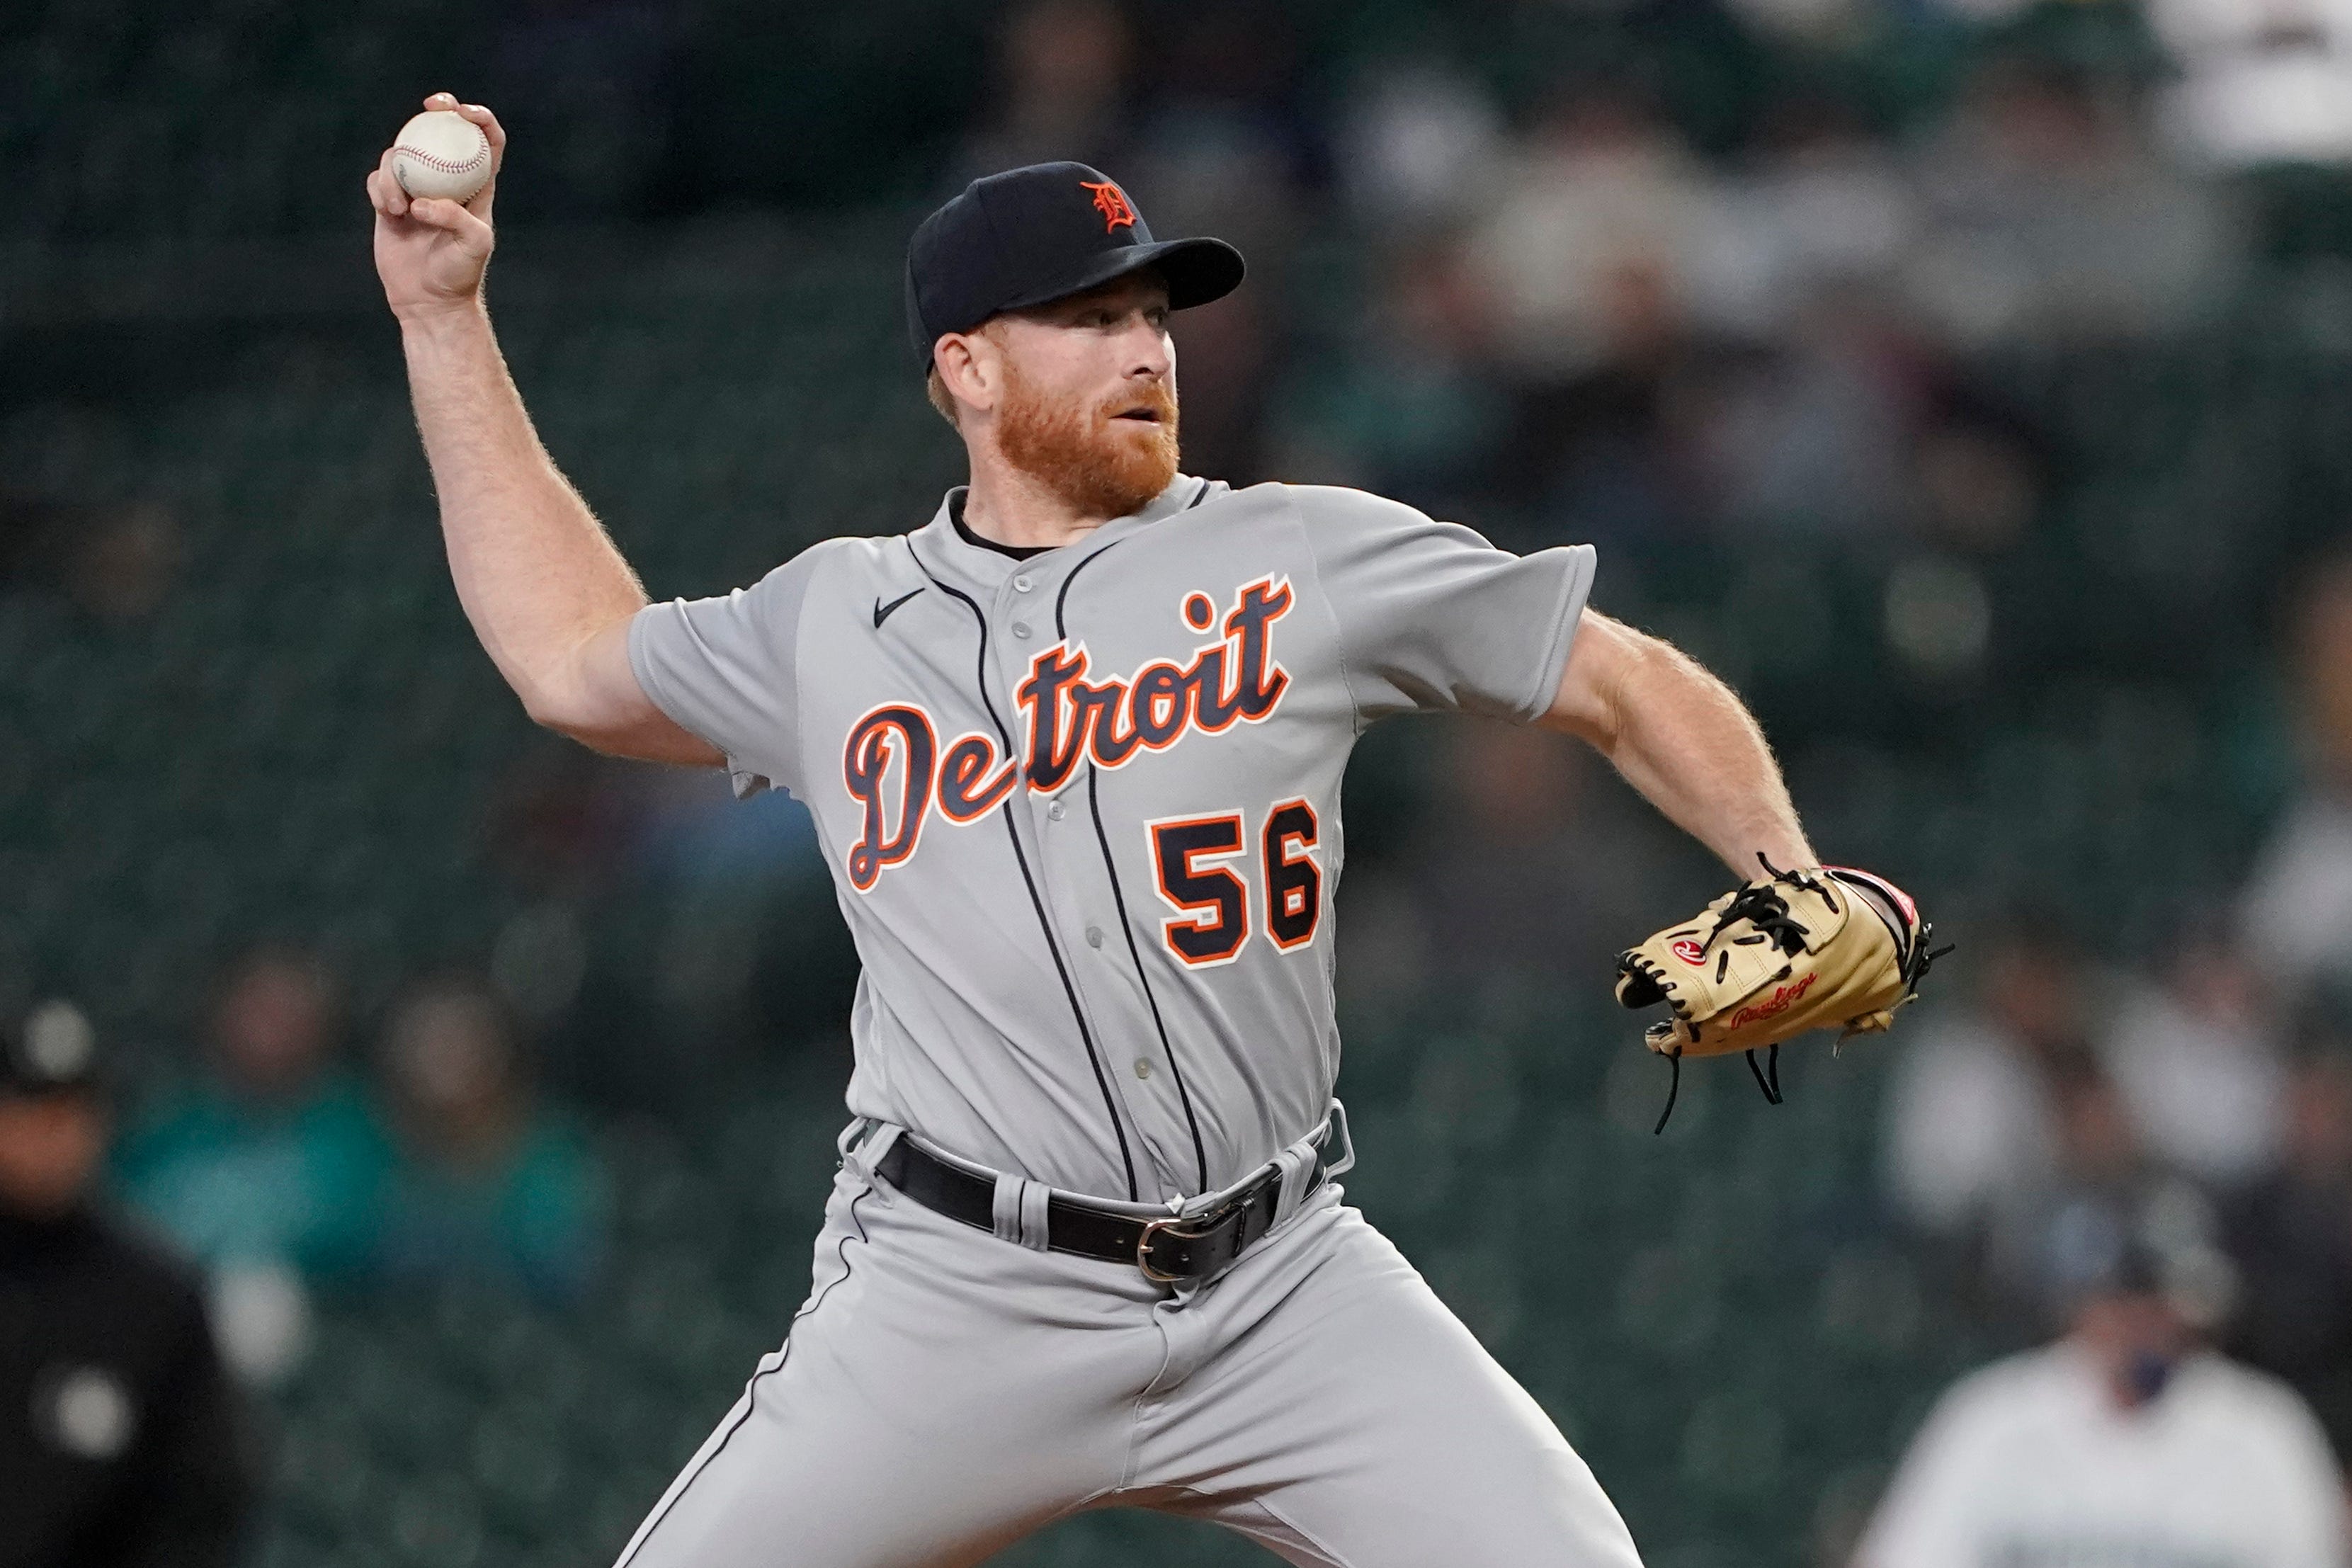 Detroit Tigers starting pitcher Spencer Turnbull throws to a Seattle Mariners batter during the first inning.